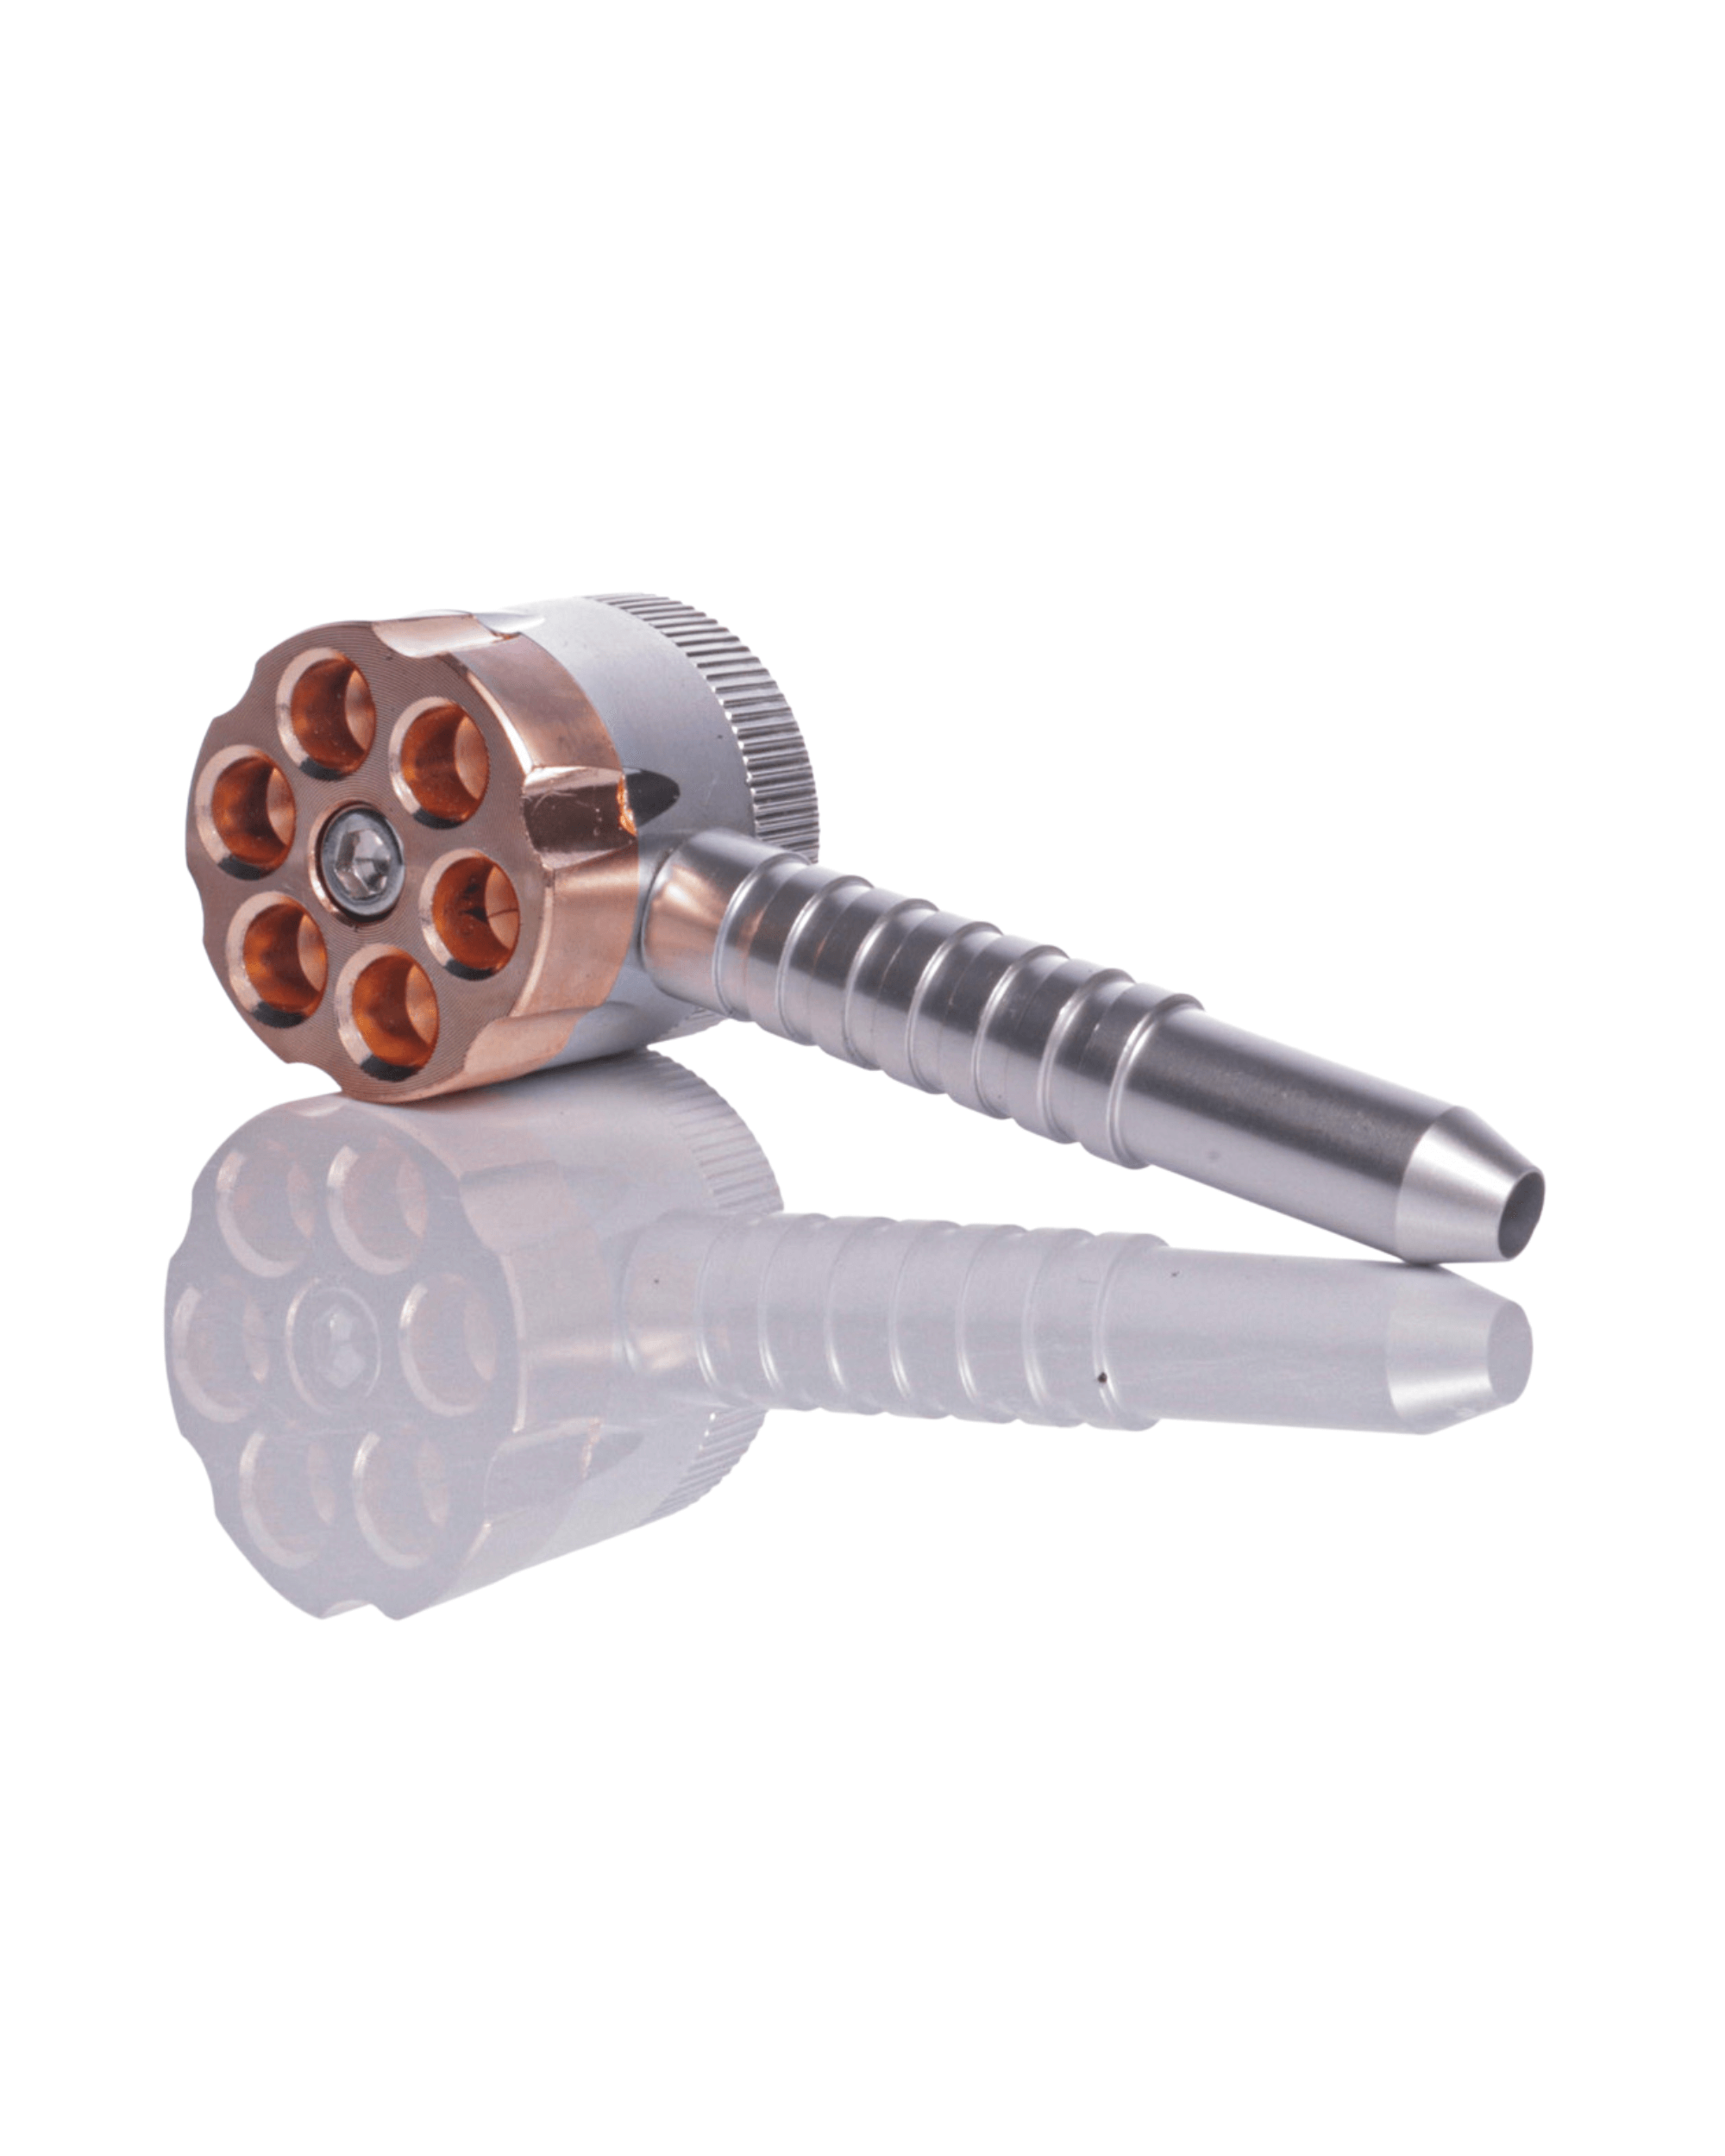 Revolver 6 Chamber Metal Pipe and Grinder worldofbongs